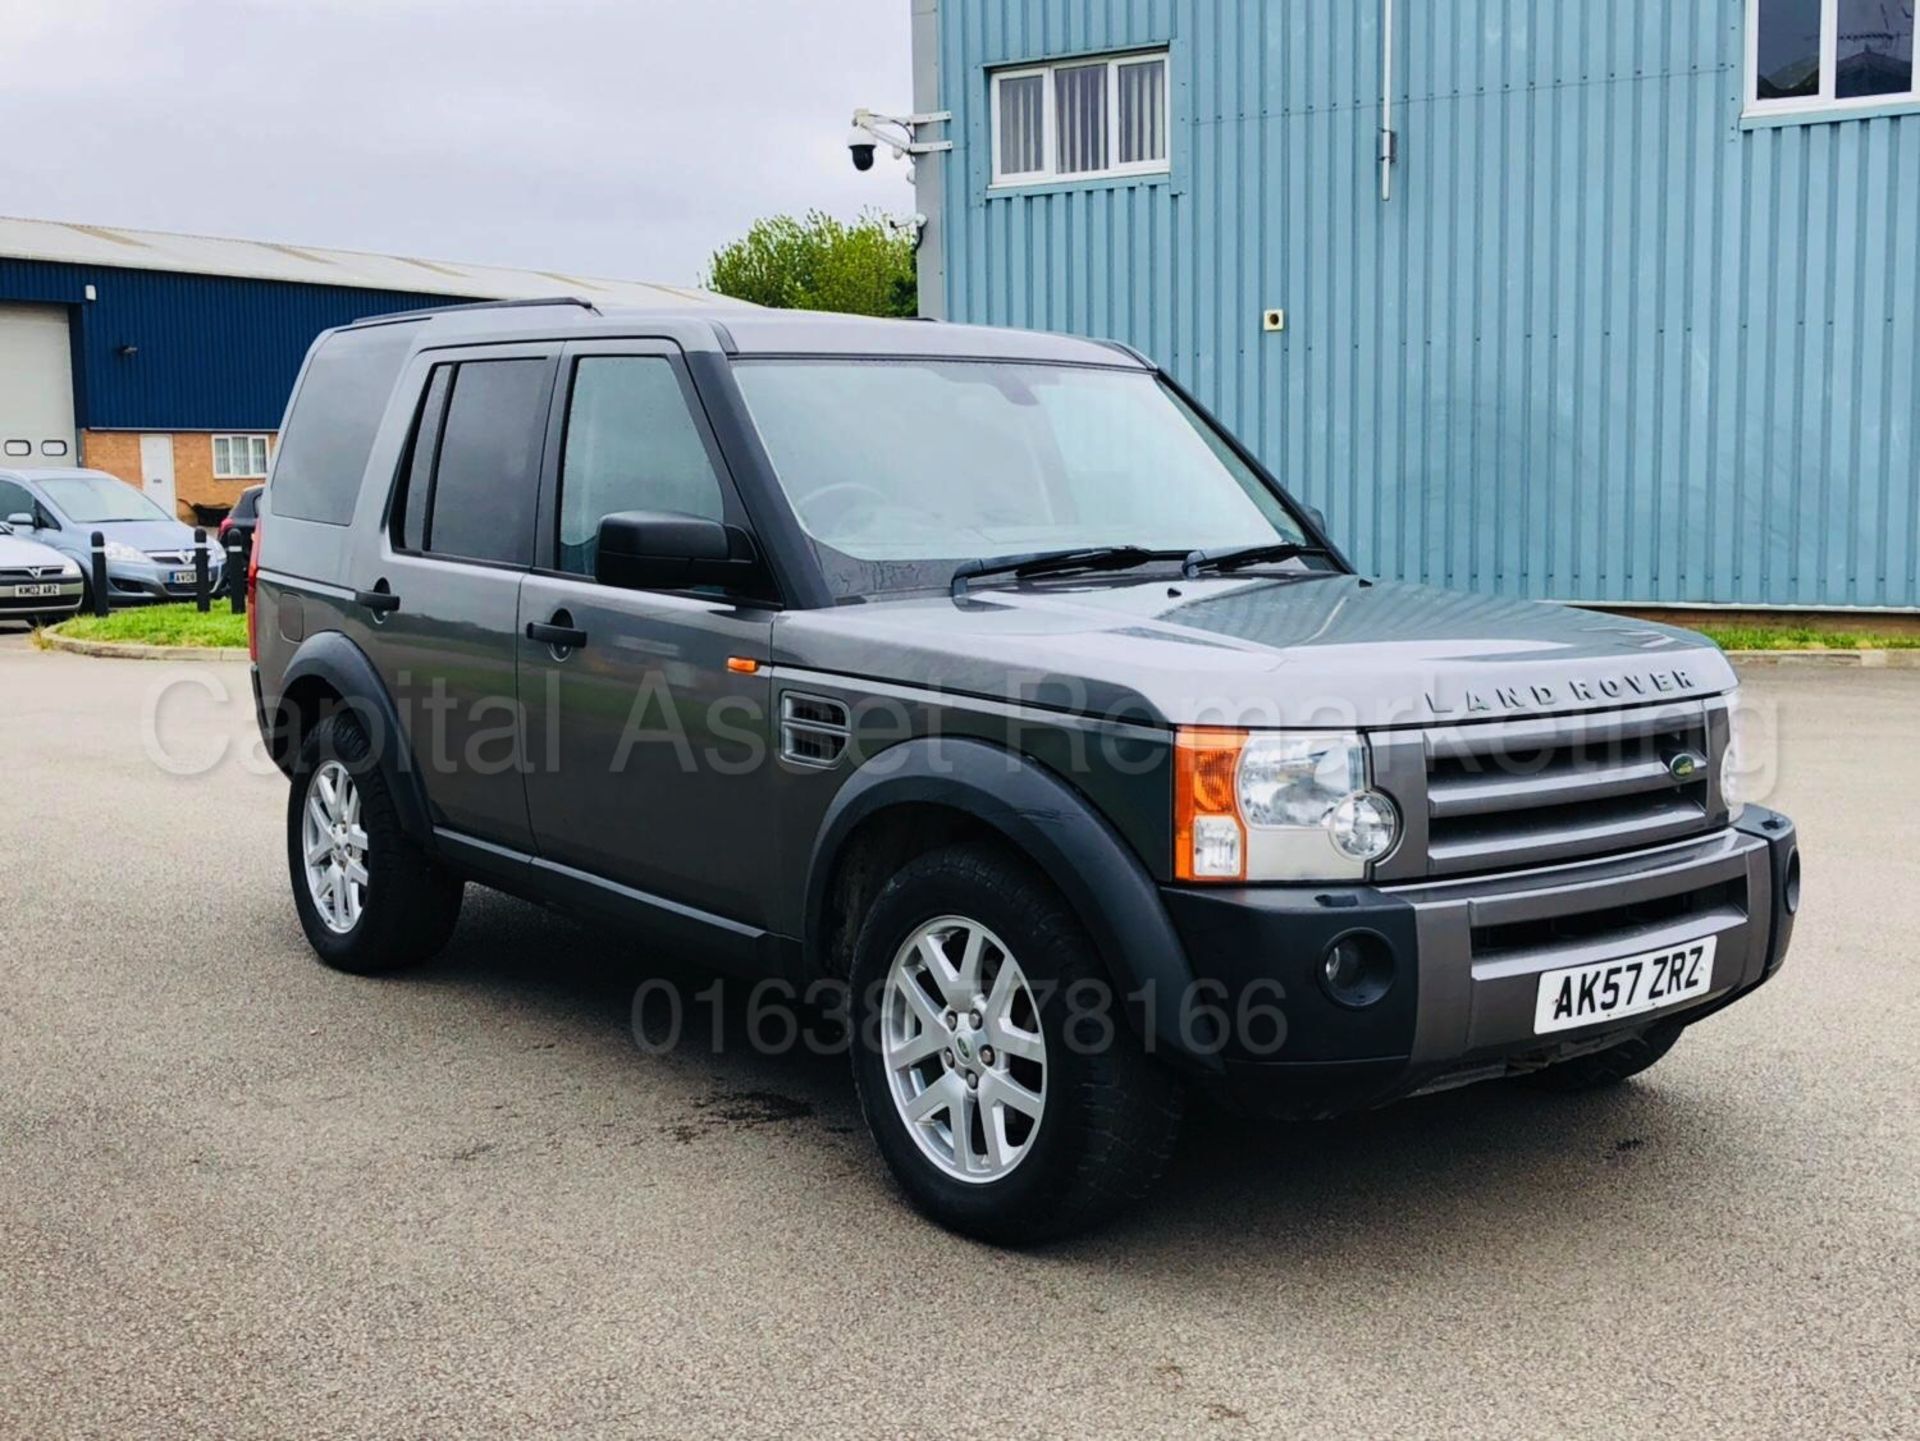 LAND ROVER DISCOVERY 3 'XS EDITION' **COMMERCIAL VAN TYPE** (2008 MODEL) '2.7 TDV6 - 190 BHP - 4X4'